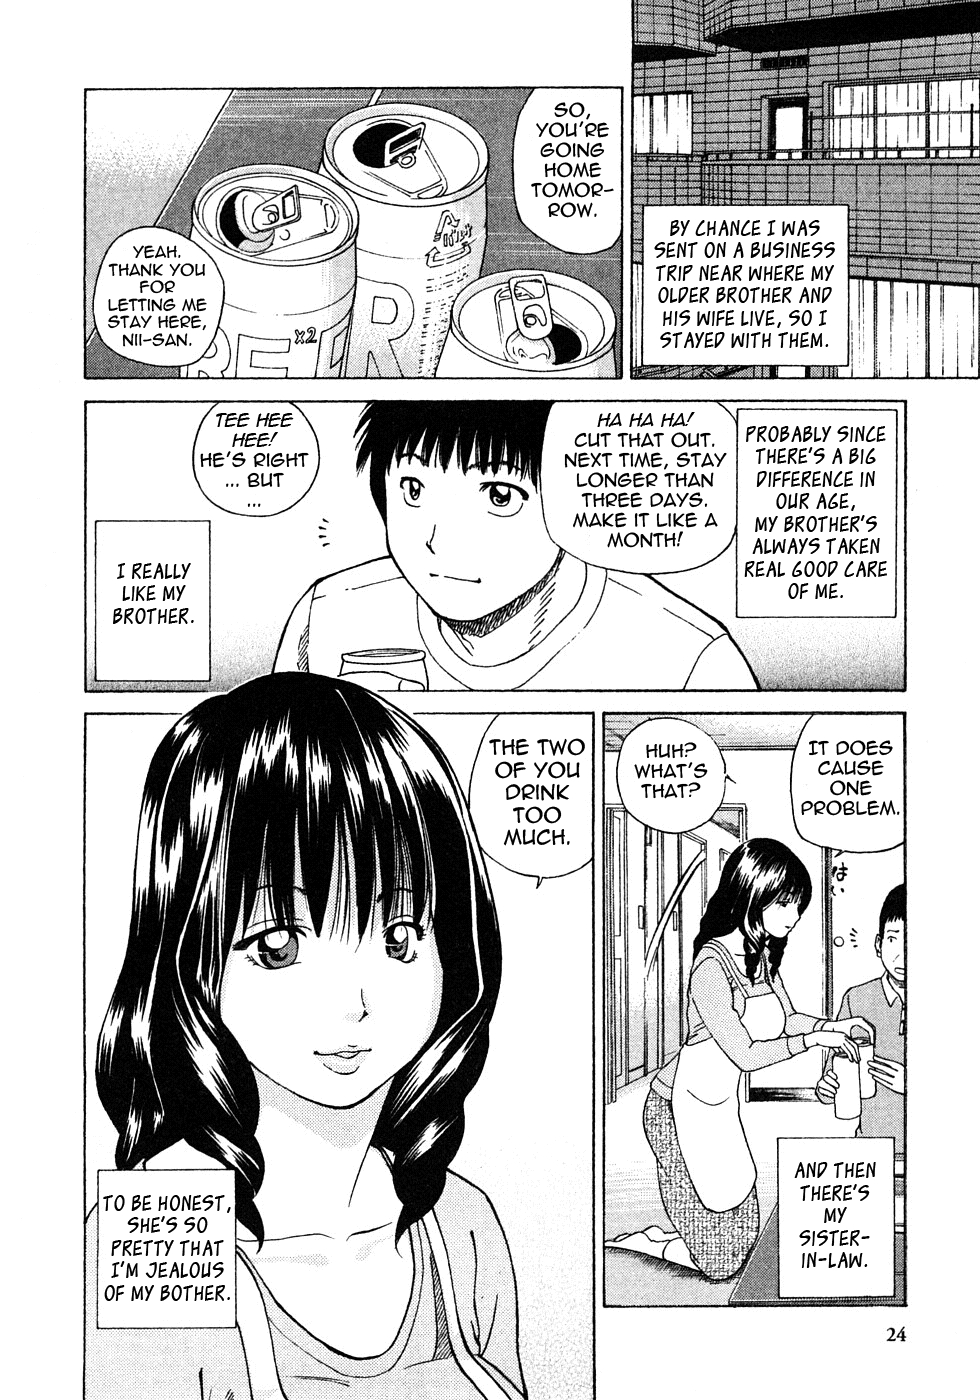 29 Year Old Lusting Wife-Chapter 2-Sexy Sister-in-law-Hentai Manga Hentai Comic - Page 2